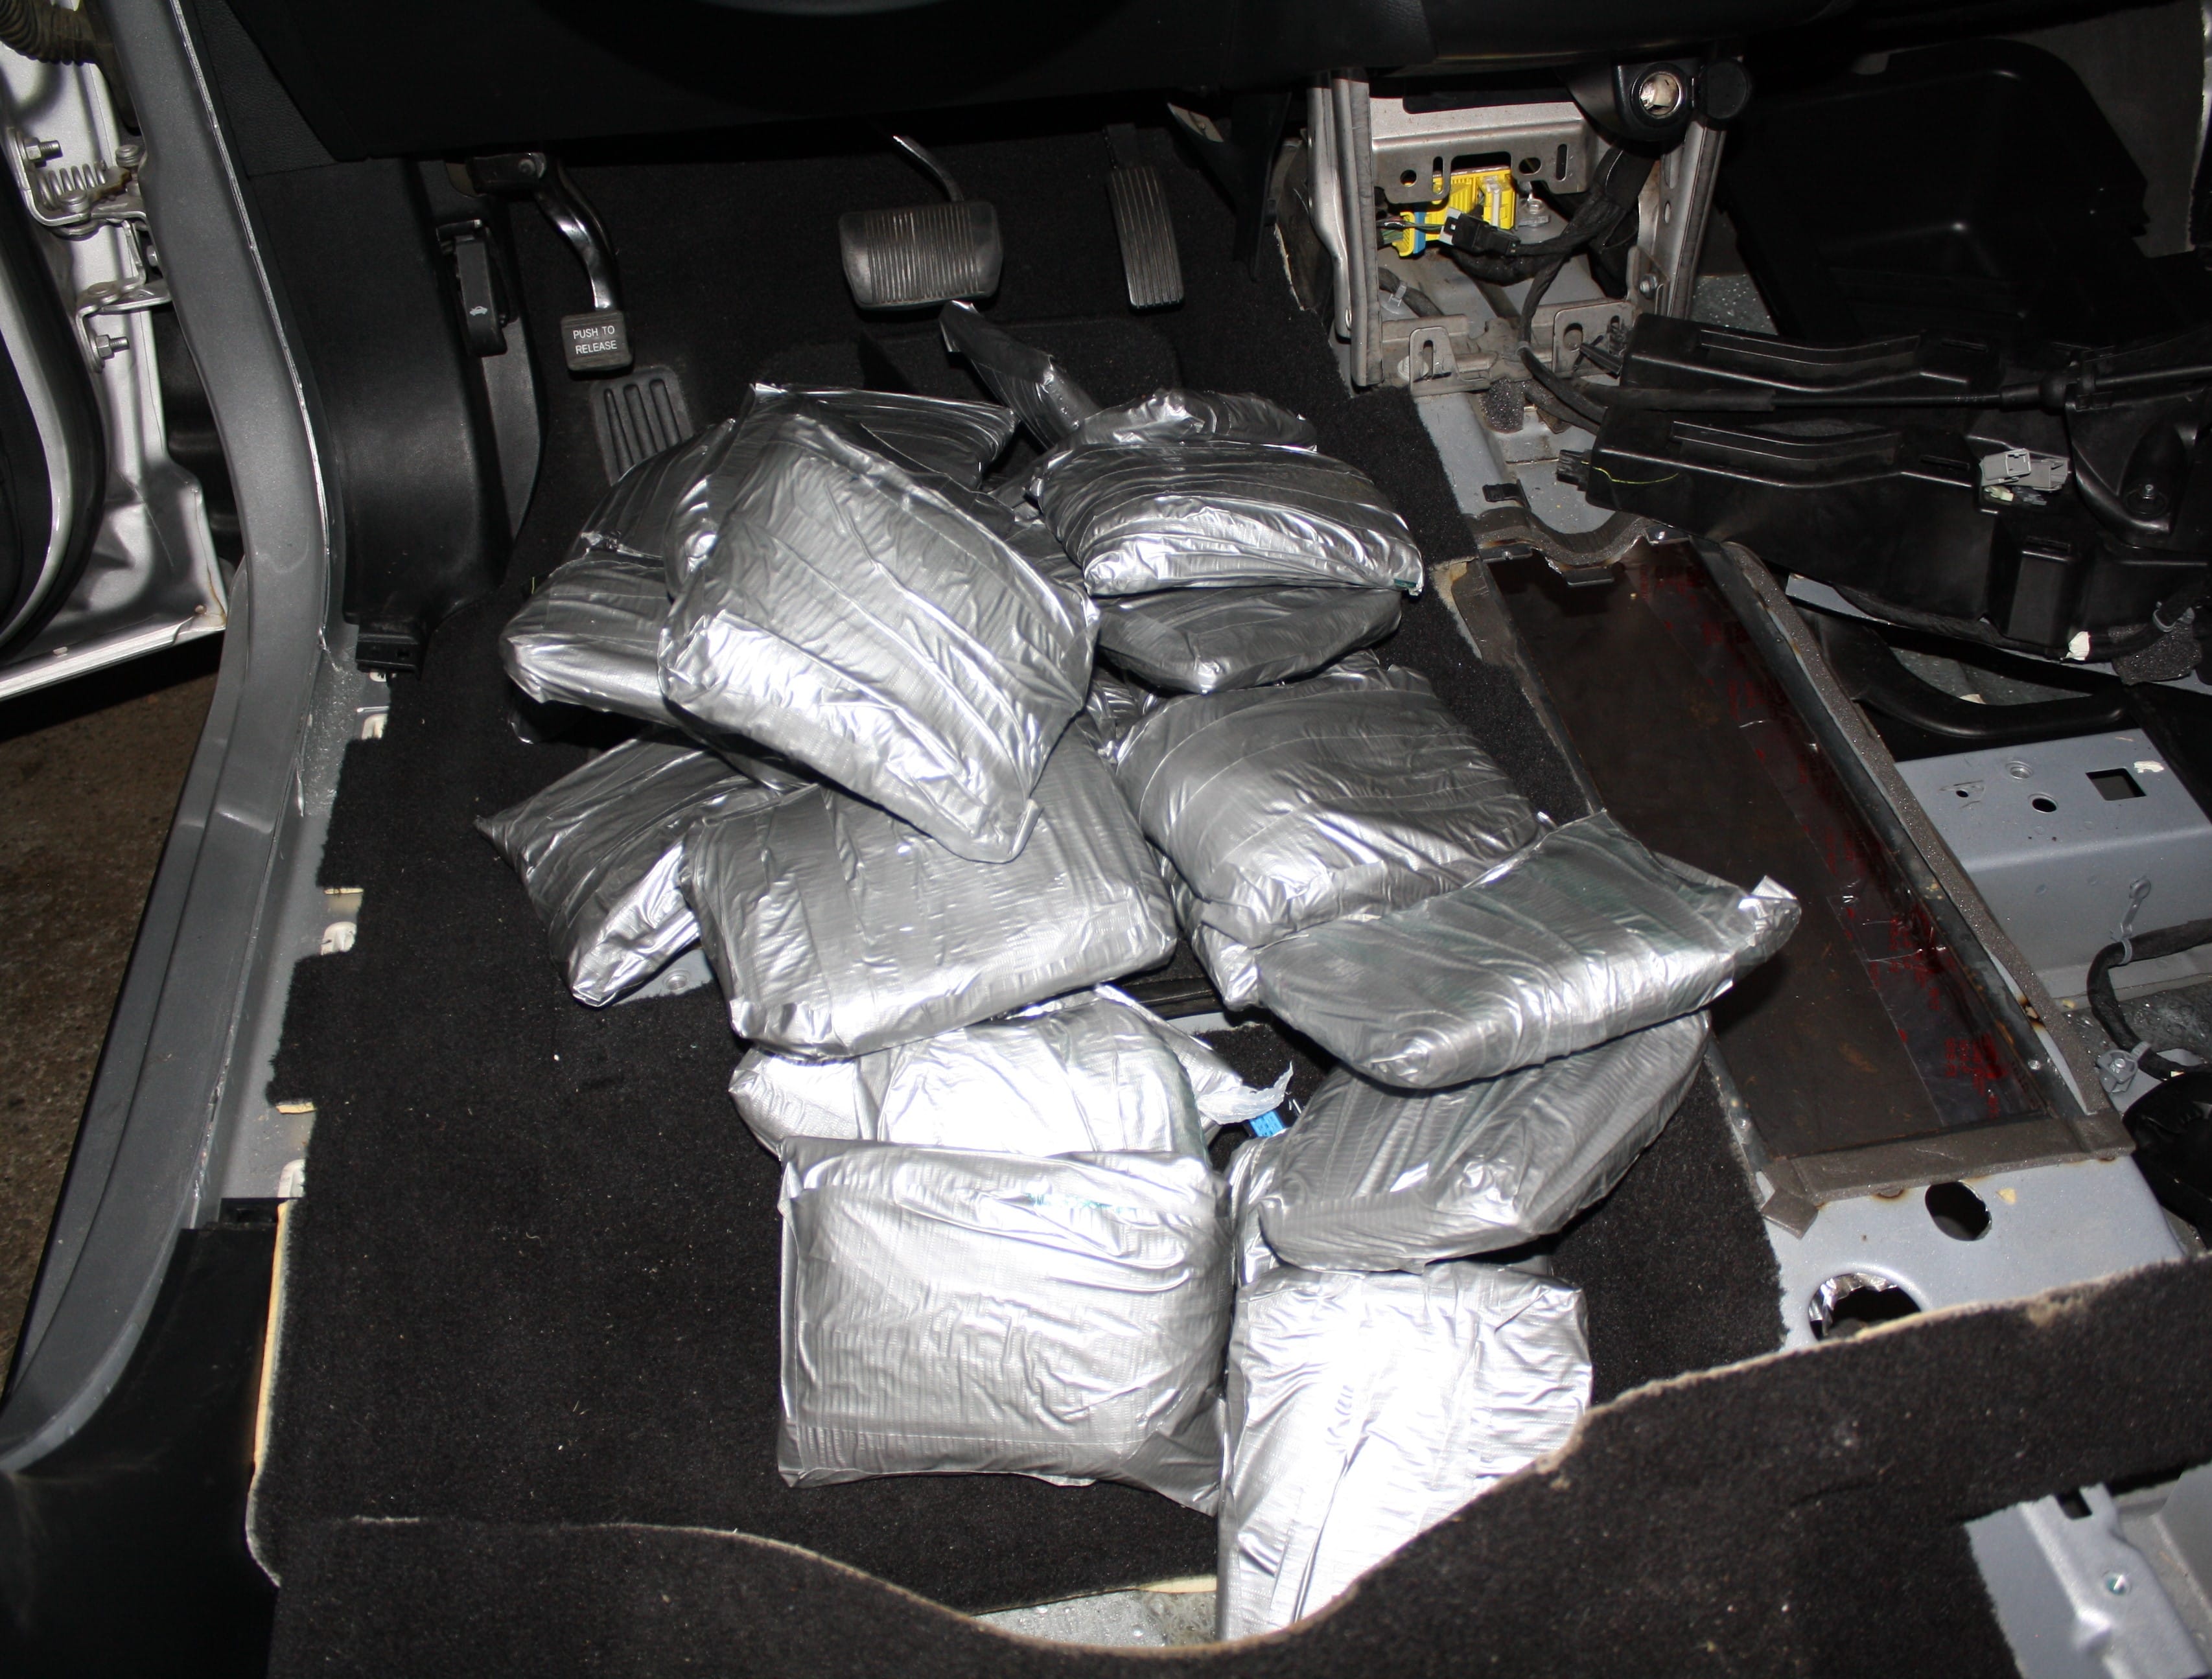 Clark Vancouver Regional Drug Force officers found about 30 lbs. of methamphetamine in a hidden compartment of an SUV on Saturday, after they detained three suspects at a store off East Mill Plain Boulevard. Three men, including 34-year-old Vancouver resident Antonio Ibarra, faces charges of criminal conspiracy.